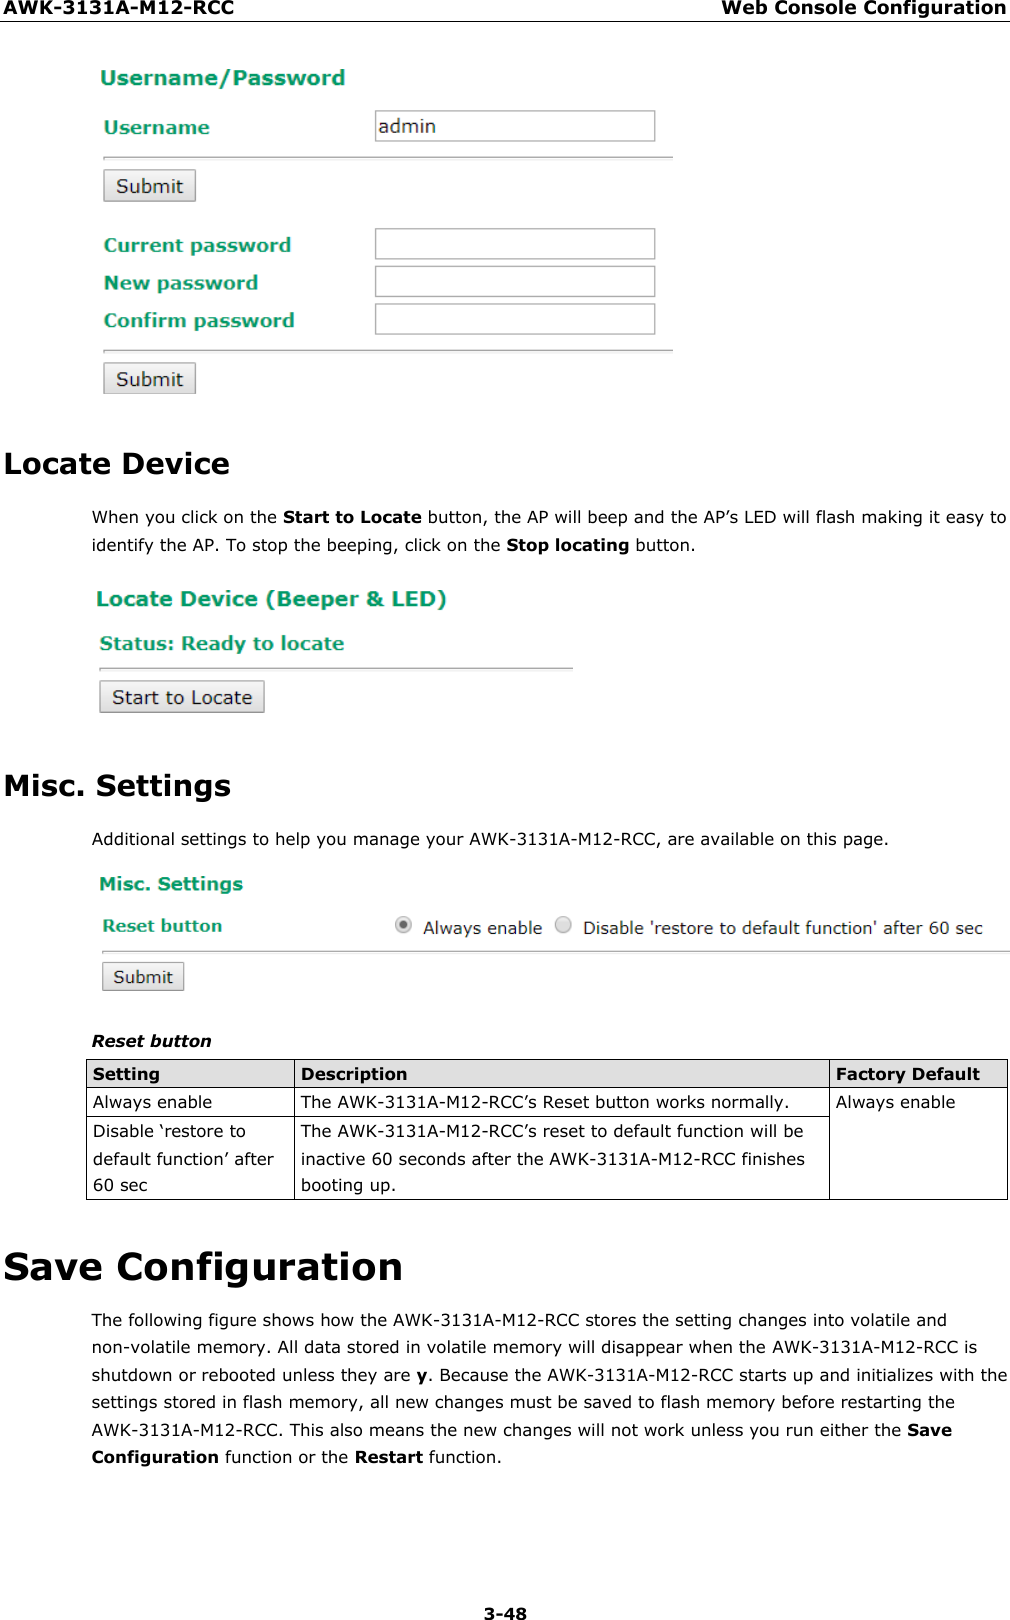 AWK-3131A-M12-RCC Web Console Configuration 3-48       Locate Device When you click on the Start to Locate button, the AP will beep and the AP’s LED will flash making it easy to identify the AP. To stop the beeping, click on the Stop locating button.    Misc. Settings Additional settings to help you manage your AWK-3131A-M12-RCC, are available on this page.   Reset button  Setting Description Factory Default Always enable The AWK-3131A-M12-RCC’s Reset button works normally. Always enable Disable ‘restore to default function’ after 60 sec The AWK-3131A-M12-RCC’s reset to default function will be inactive 60 seconds after the AWK-3131A-M12-RCC finishes booting up.  Save Configuration The following figure shows how the AWK-3131A-M12-RCC stores the setting changes into volatile and non-volatile memory. All data stored in volatile memory will disappear when the AWK-3131A-M12-RCC is shutdown or rebooted unless they are y. Because the AWK-3131A-M12-RCC starts up and initializes with the settings stored in flash memory, all new changes must be saved to flash memory before restarting the AWK-3131A-M12-RCC. This also means the new changes will not work unless you run either the Save Configuration function or the Restart function. 